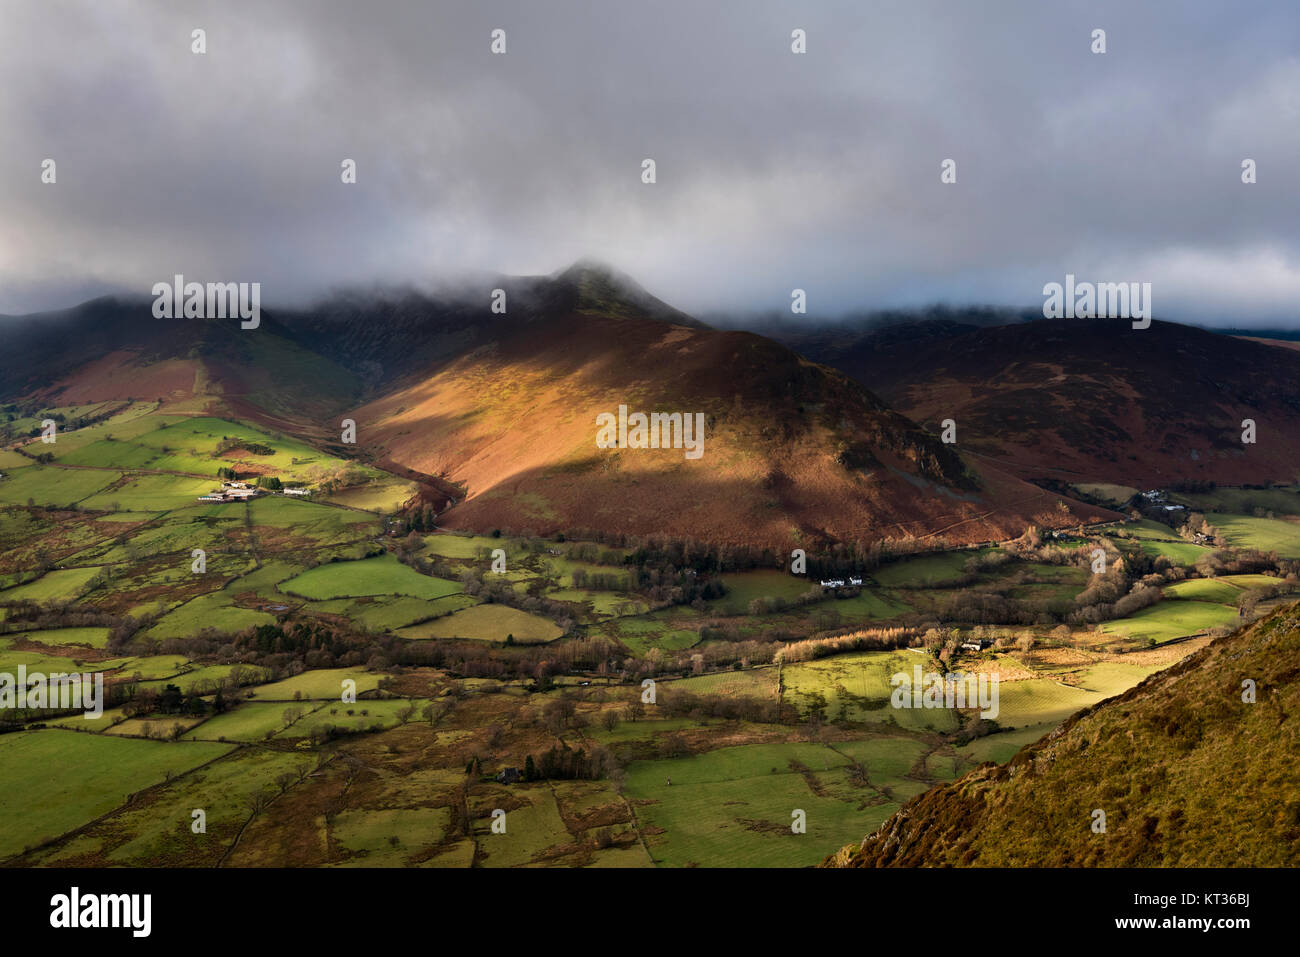 The Derwent Fells seen under a stormy sky from Cat Bells hill, Lake District, Cumbria, UK Stock Photo